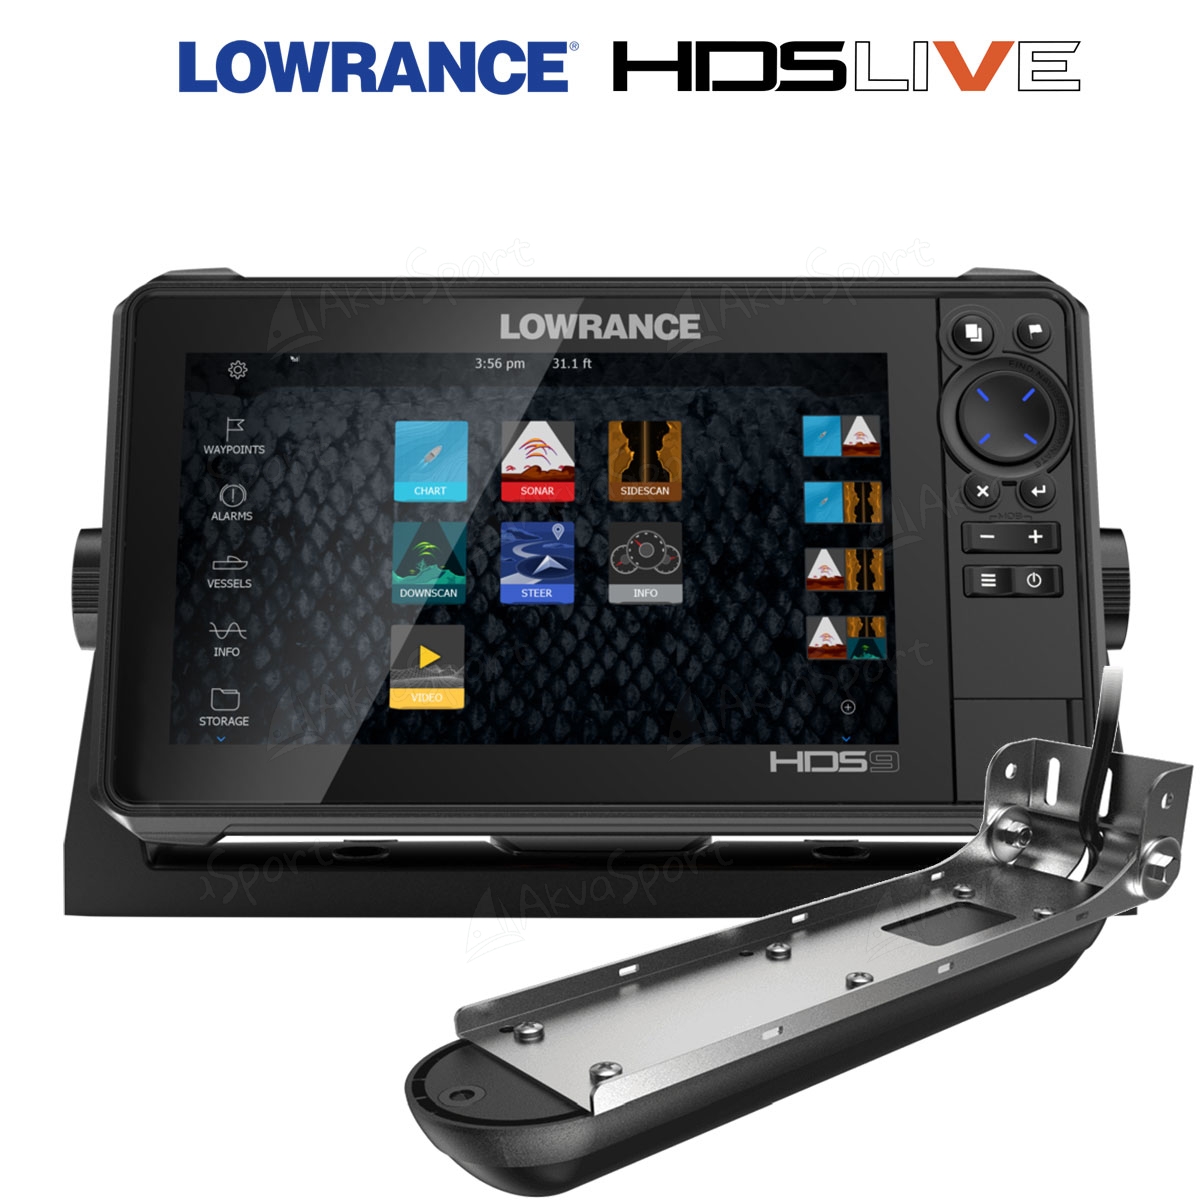 lowrance software downloads for hds